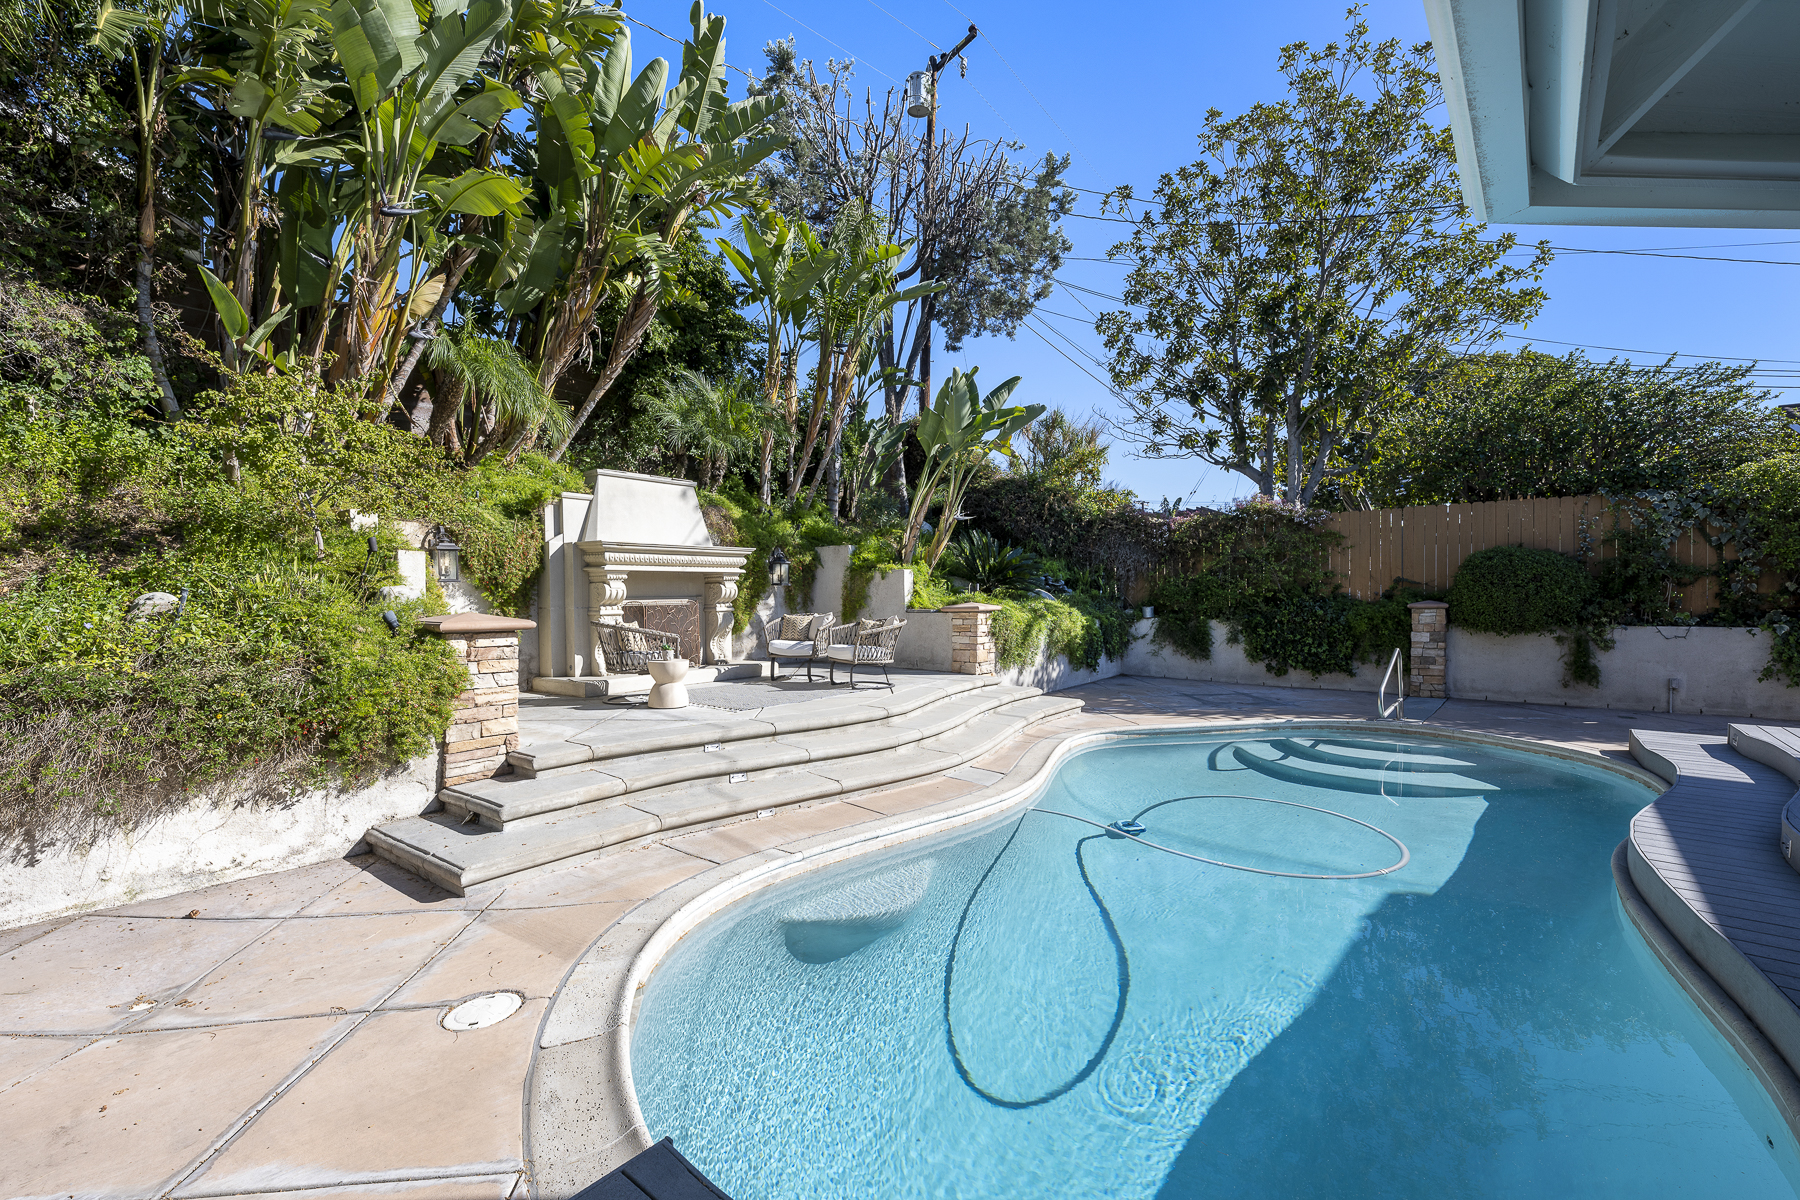 806 N. Adlena Drive, Fullerton, CA 92833: Exterior shot of pool and fireplace seating area.